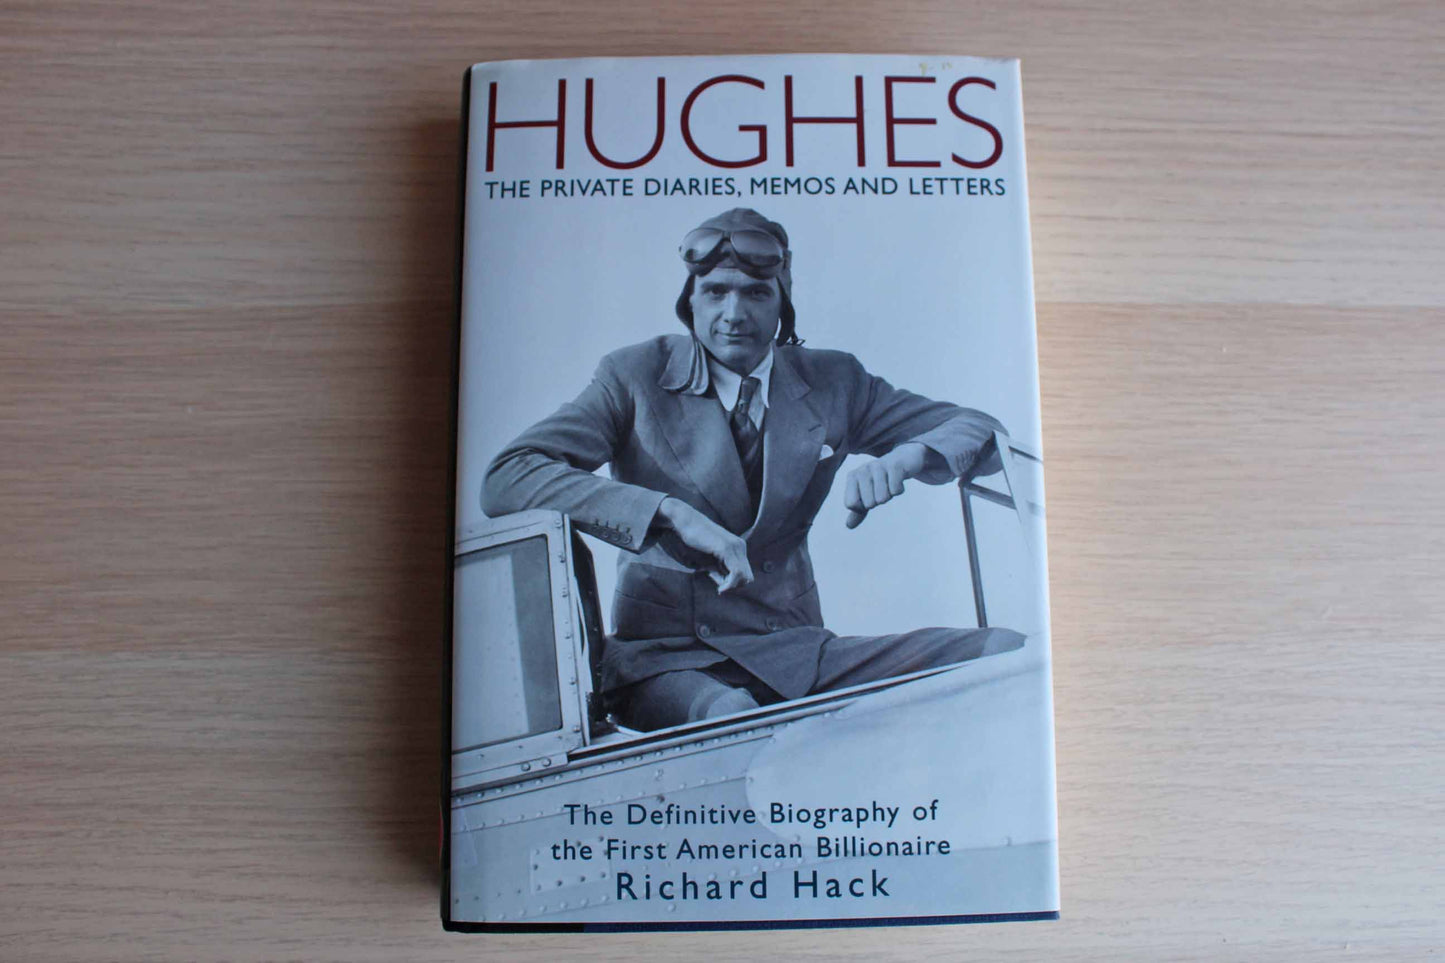 Hughes:  The Private Diaries, Memos and Letters by Richard Hack